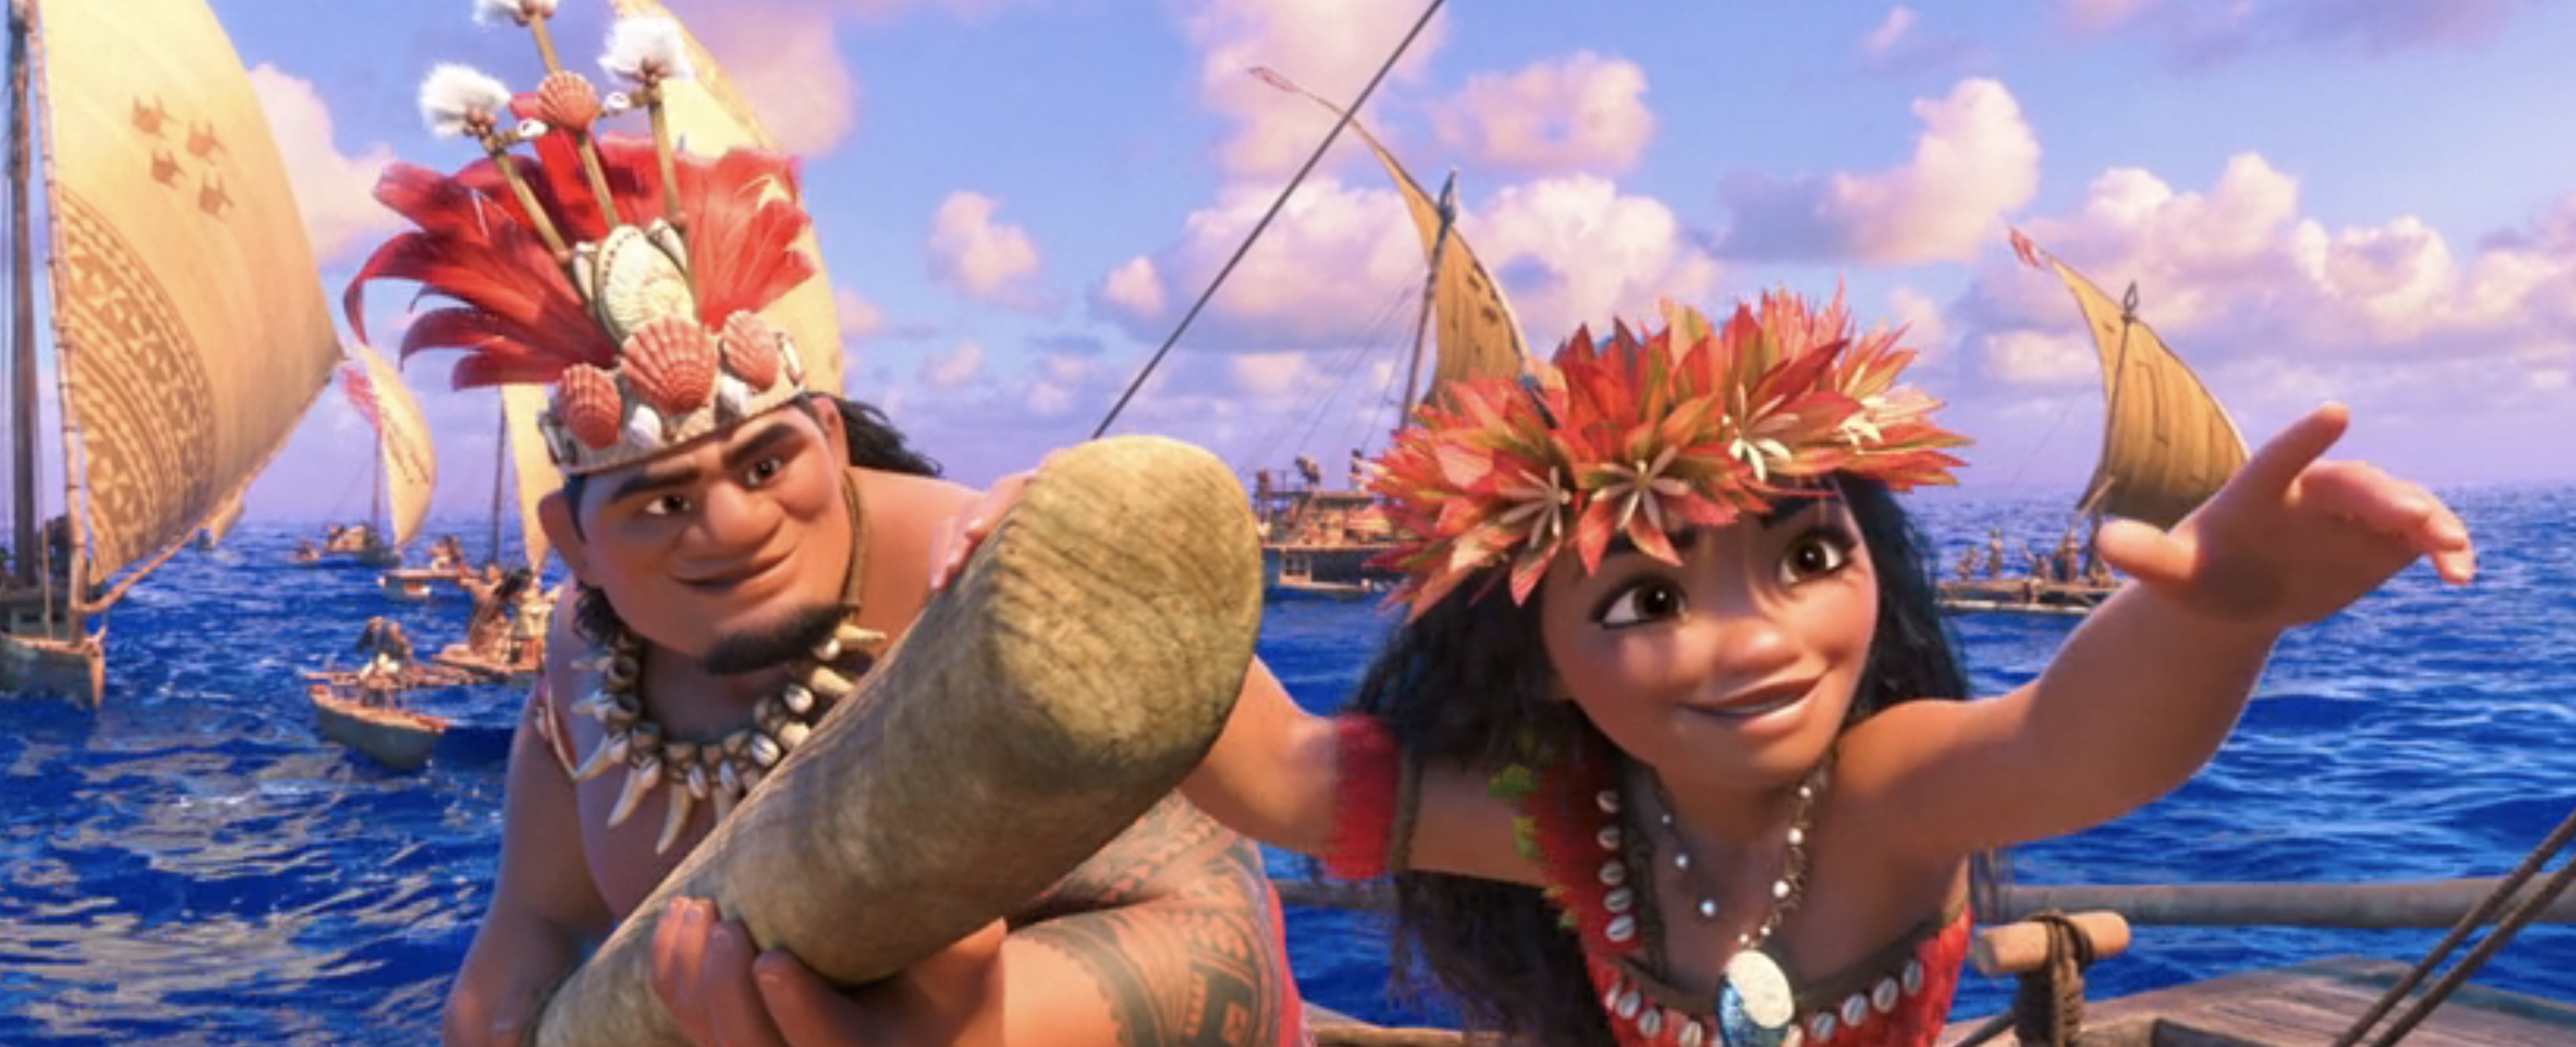 Animated characters Maui and Moana on a boat with the ocean and other boats in the background